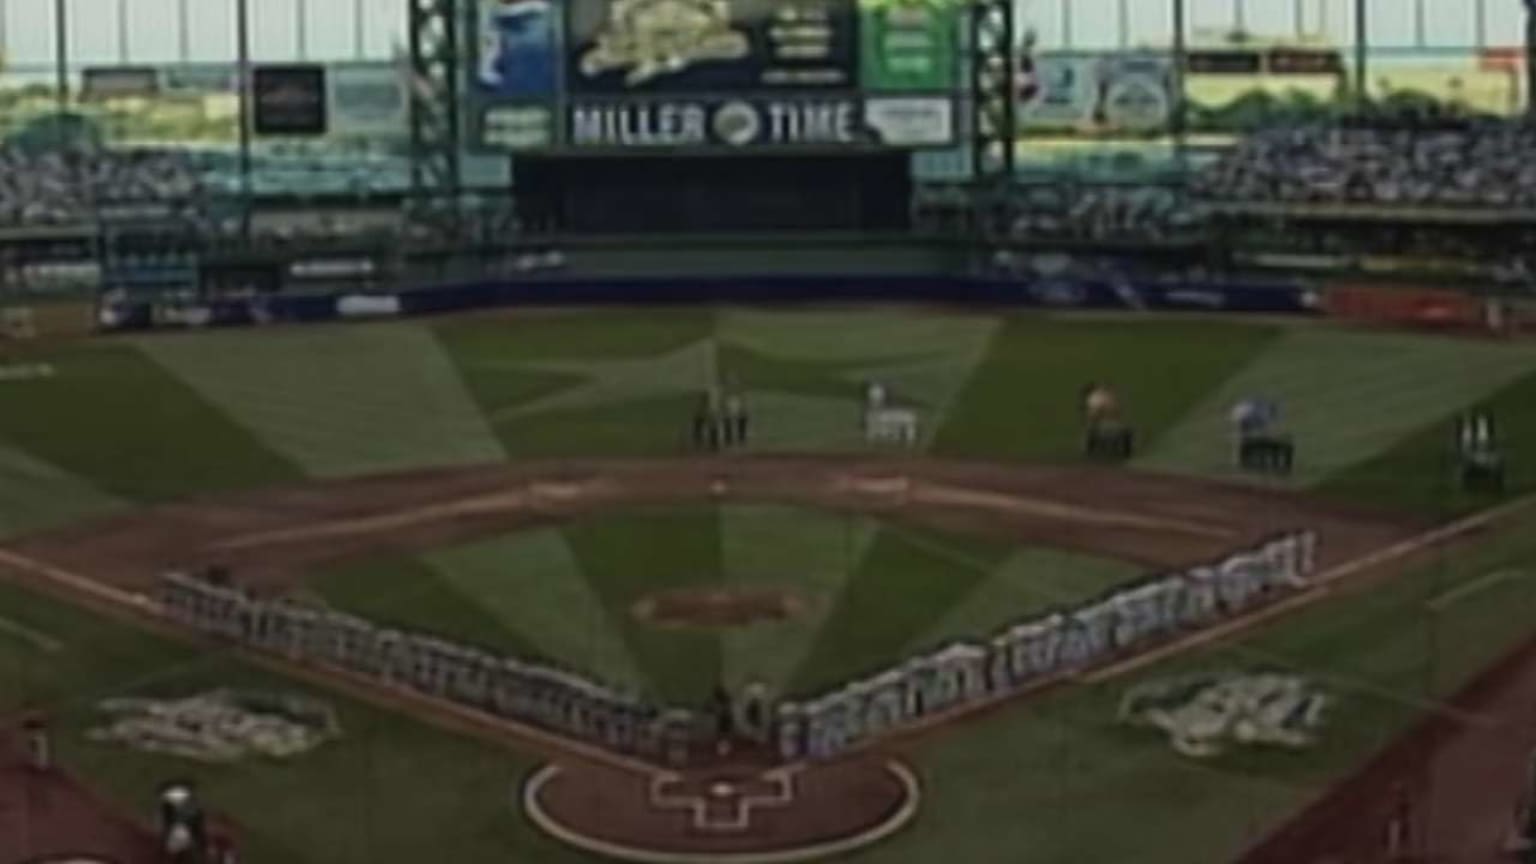 2002 Major League Baseball All-Star Game at Miller Park ends in tie